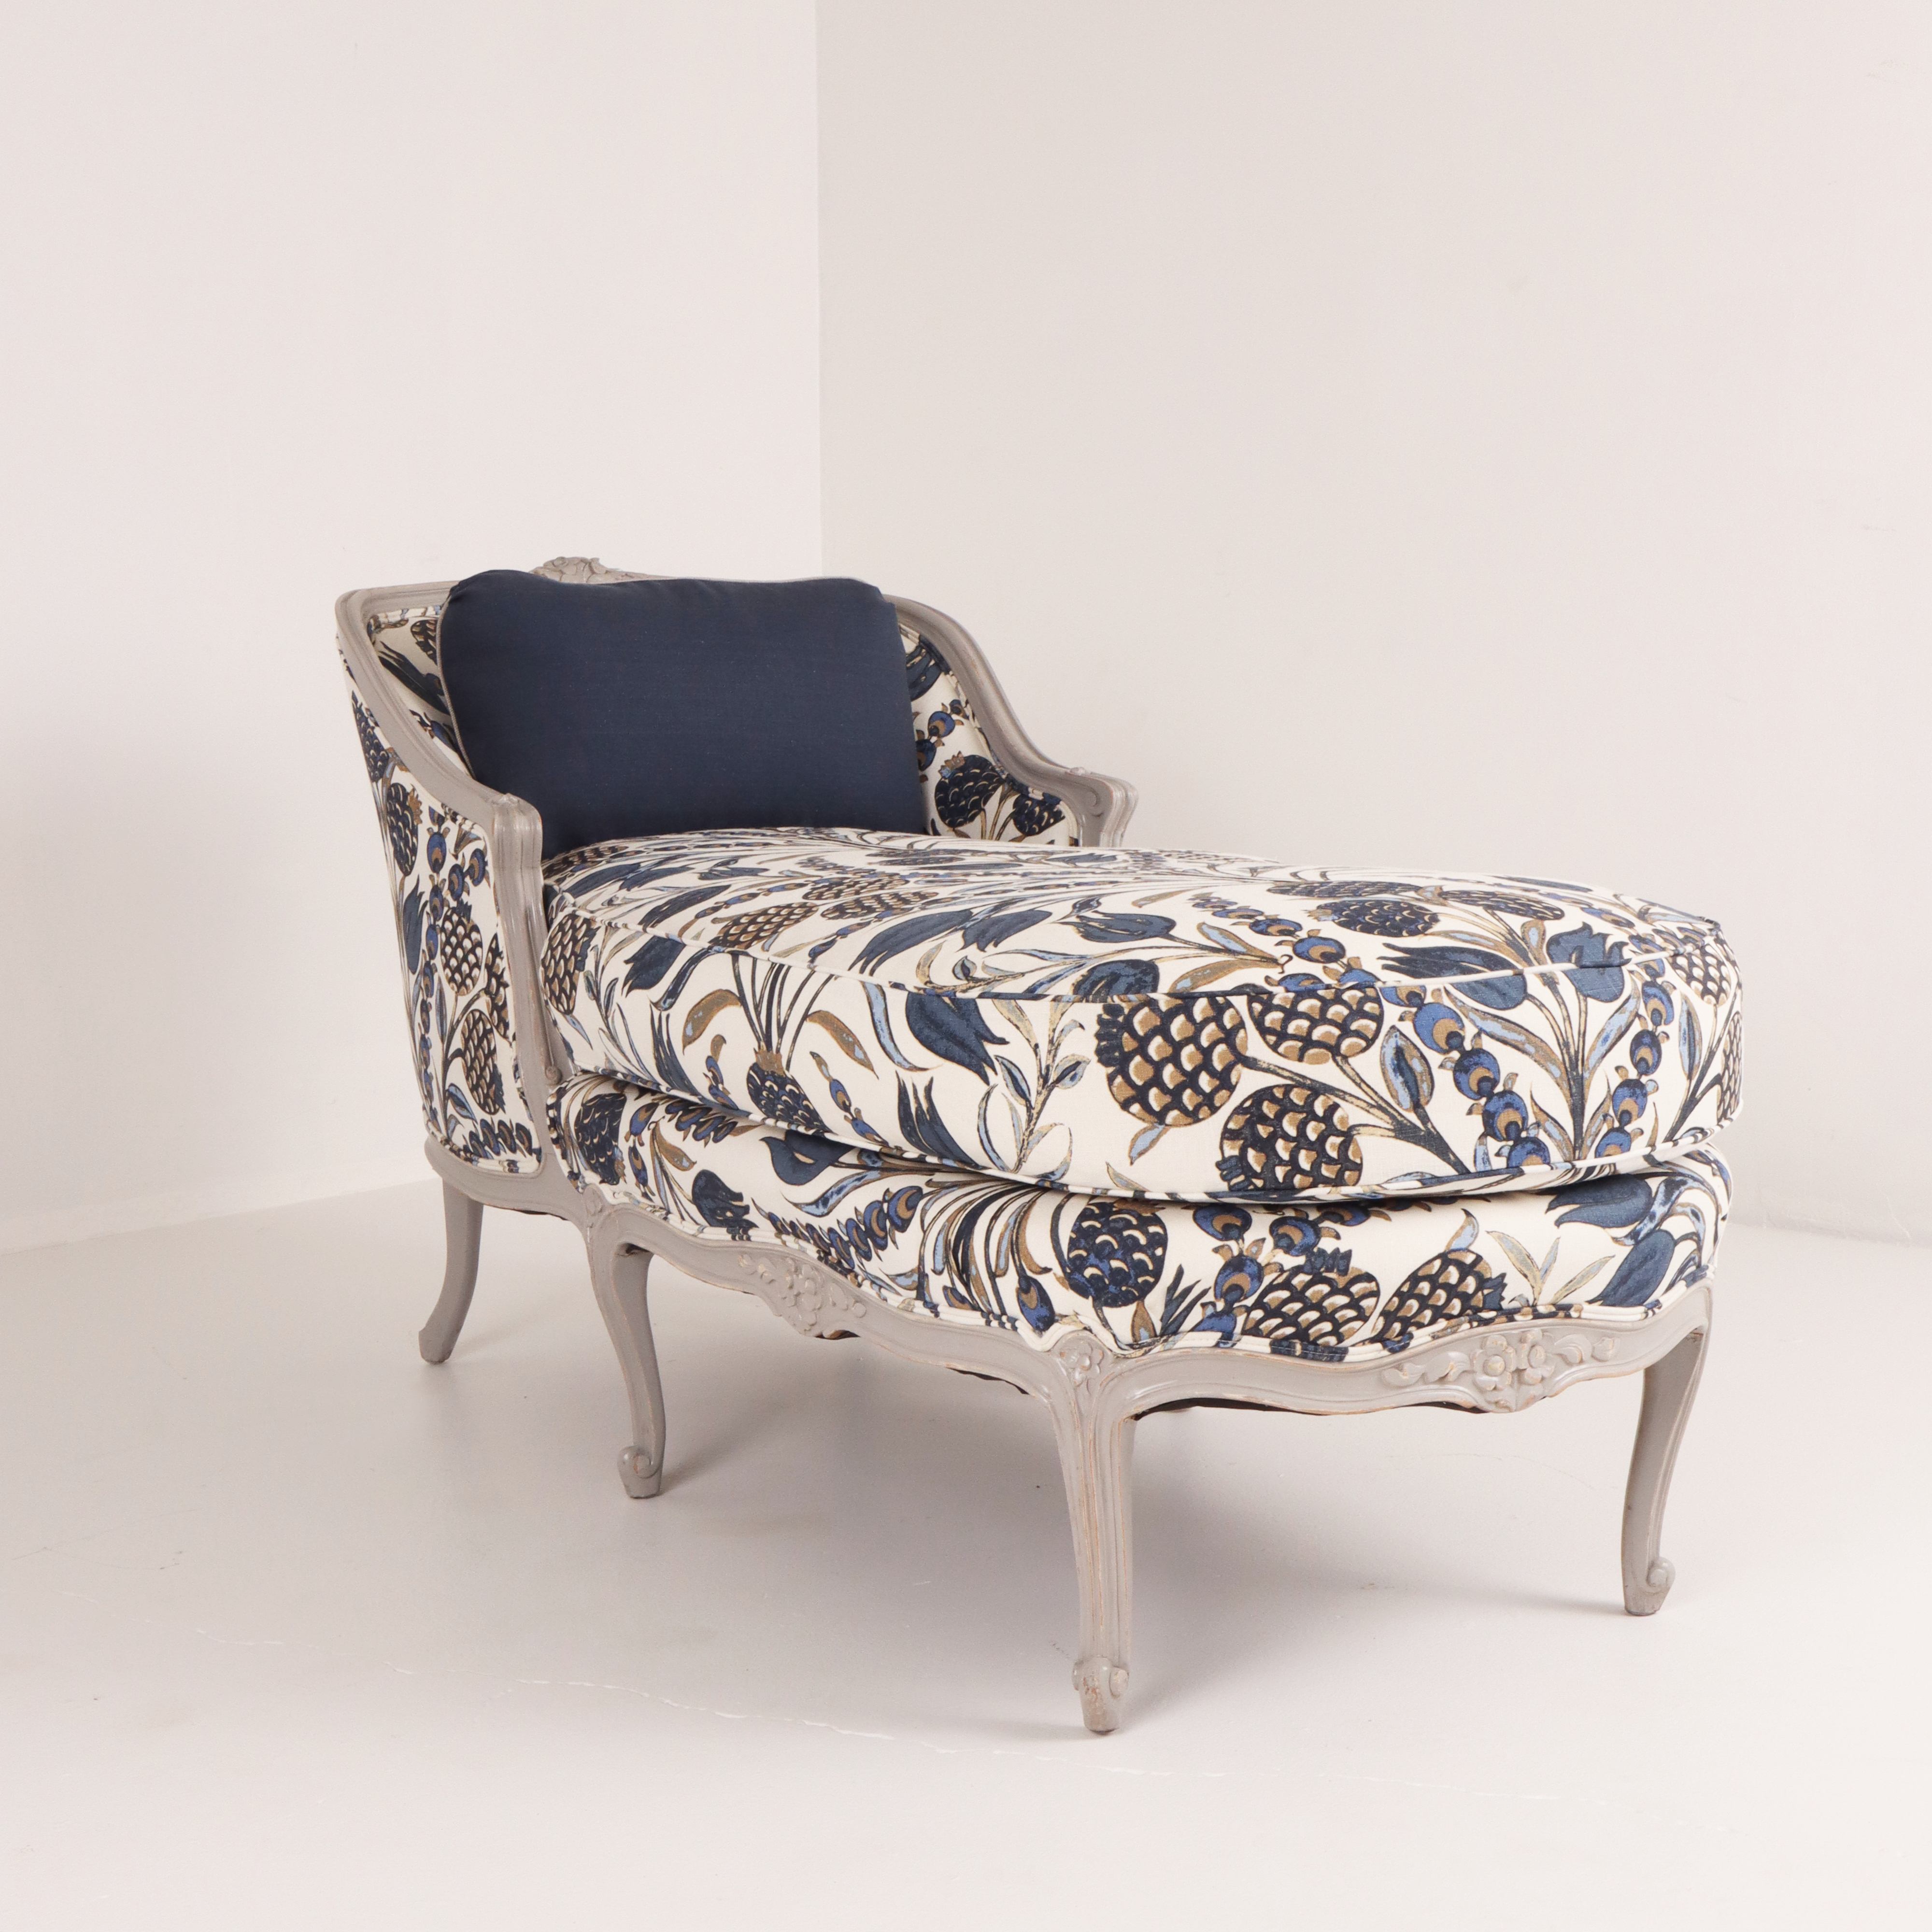 French Antique Chaise Lounge in Thibaut Cornelia Navy Fabric